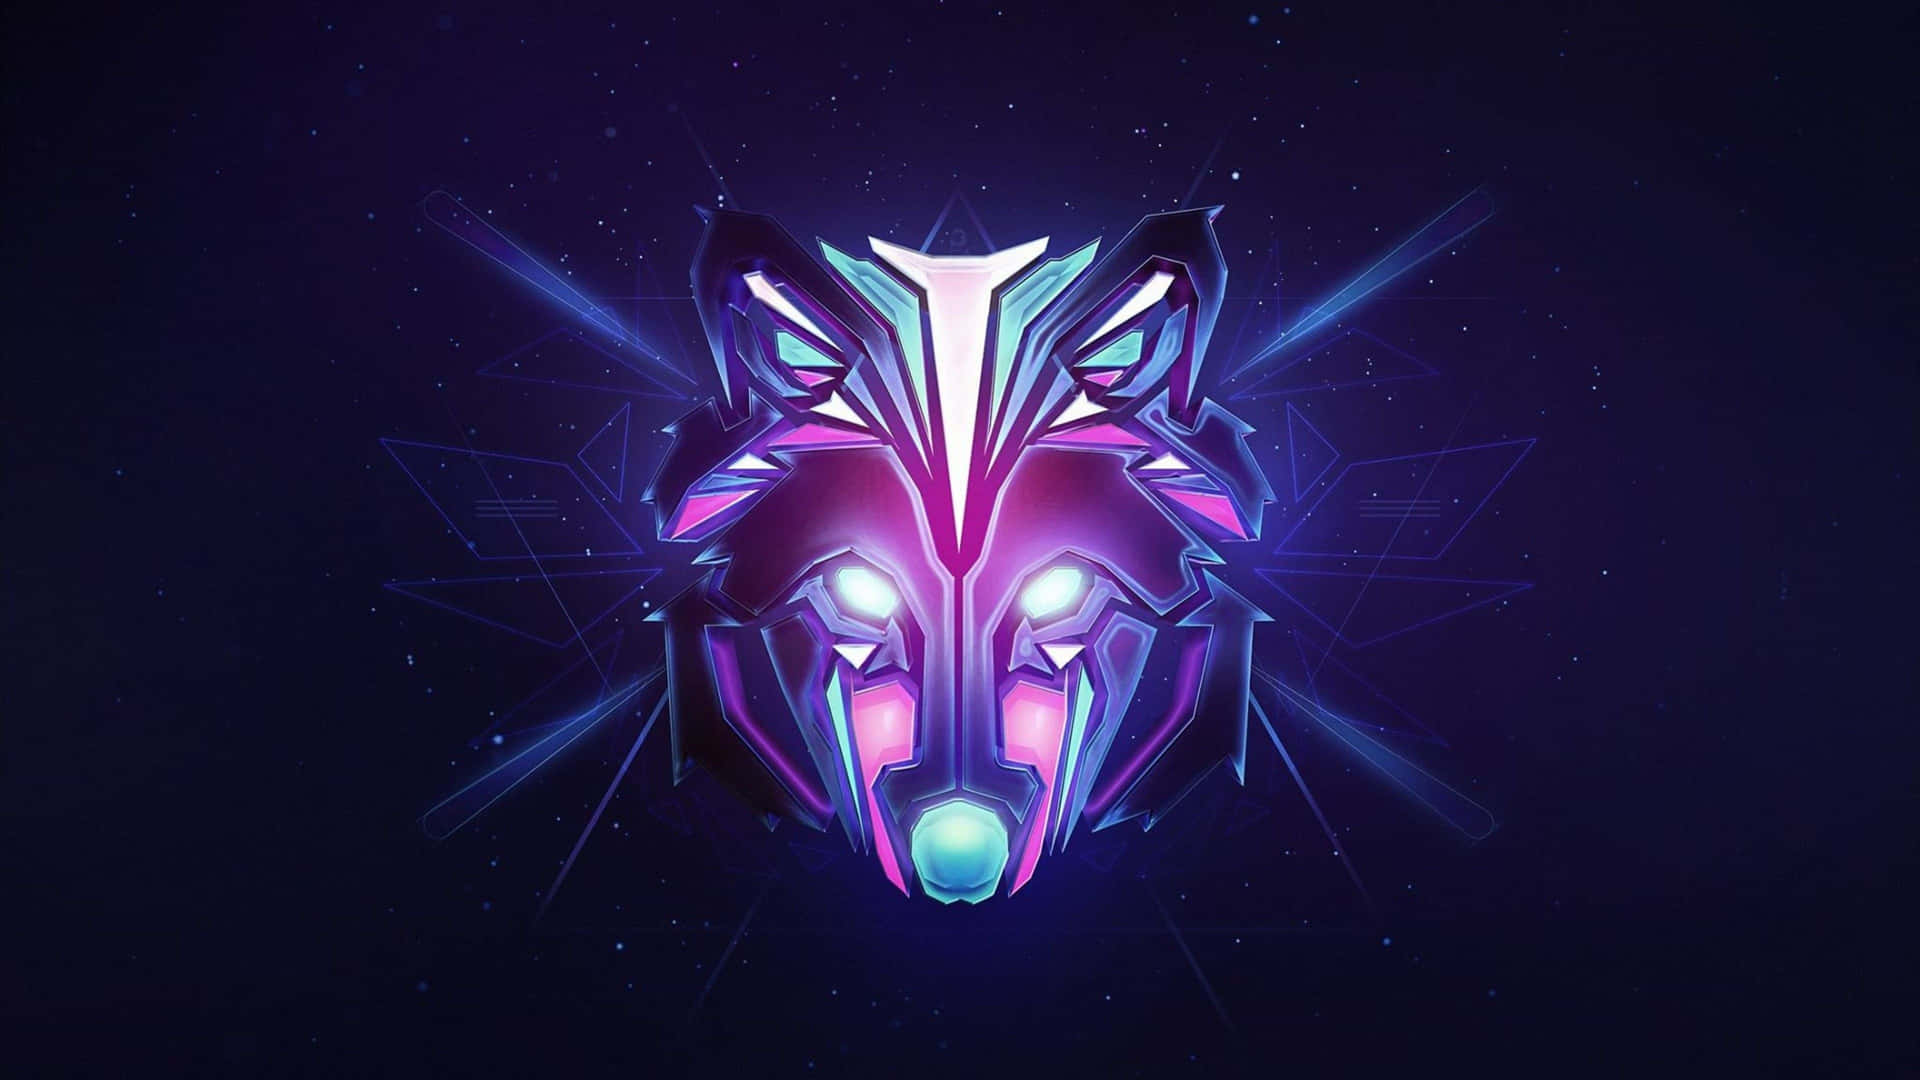 Take a journey to infinity and beyond with the mystical Galaxy Wolf